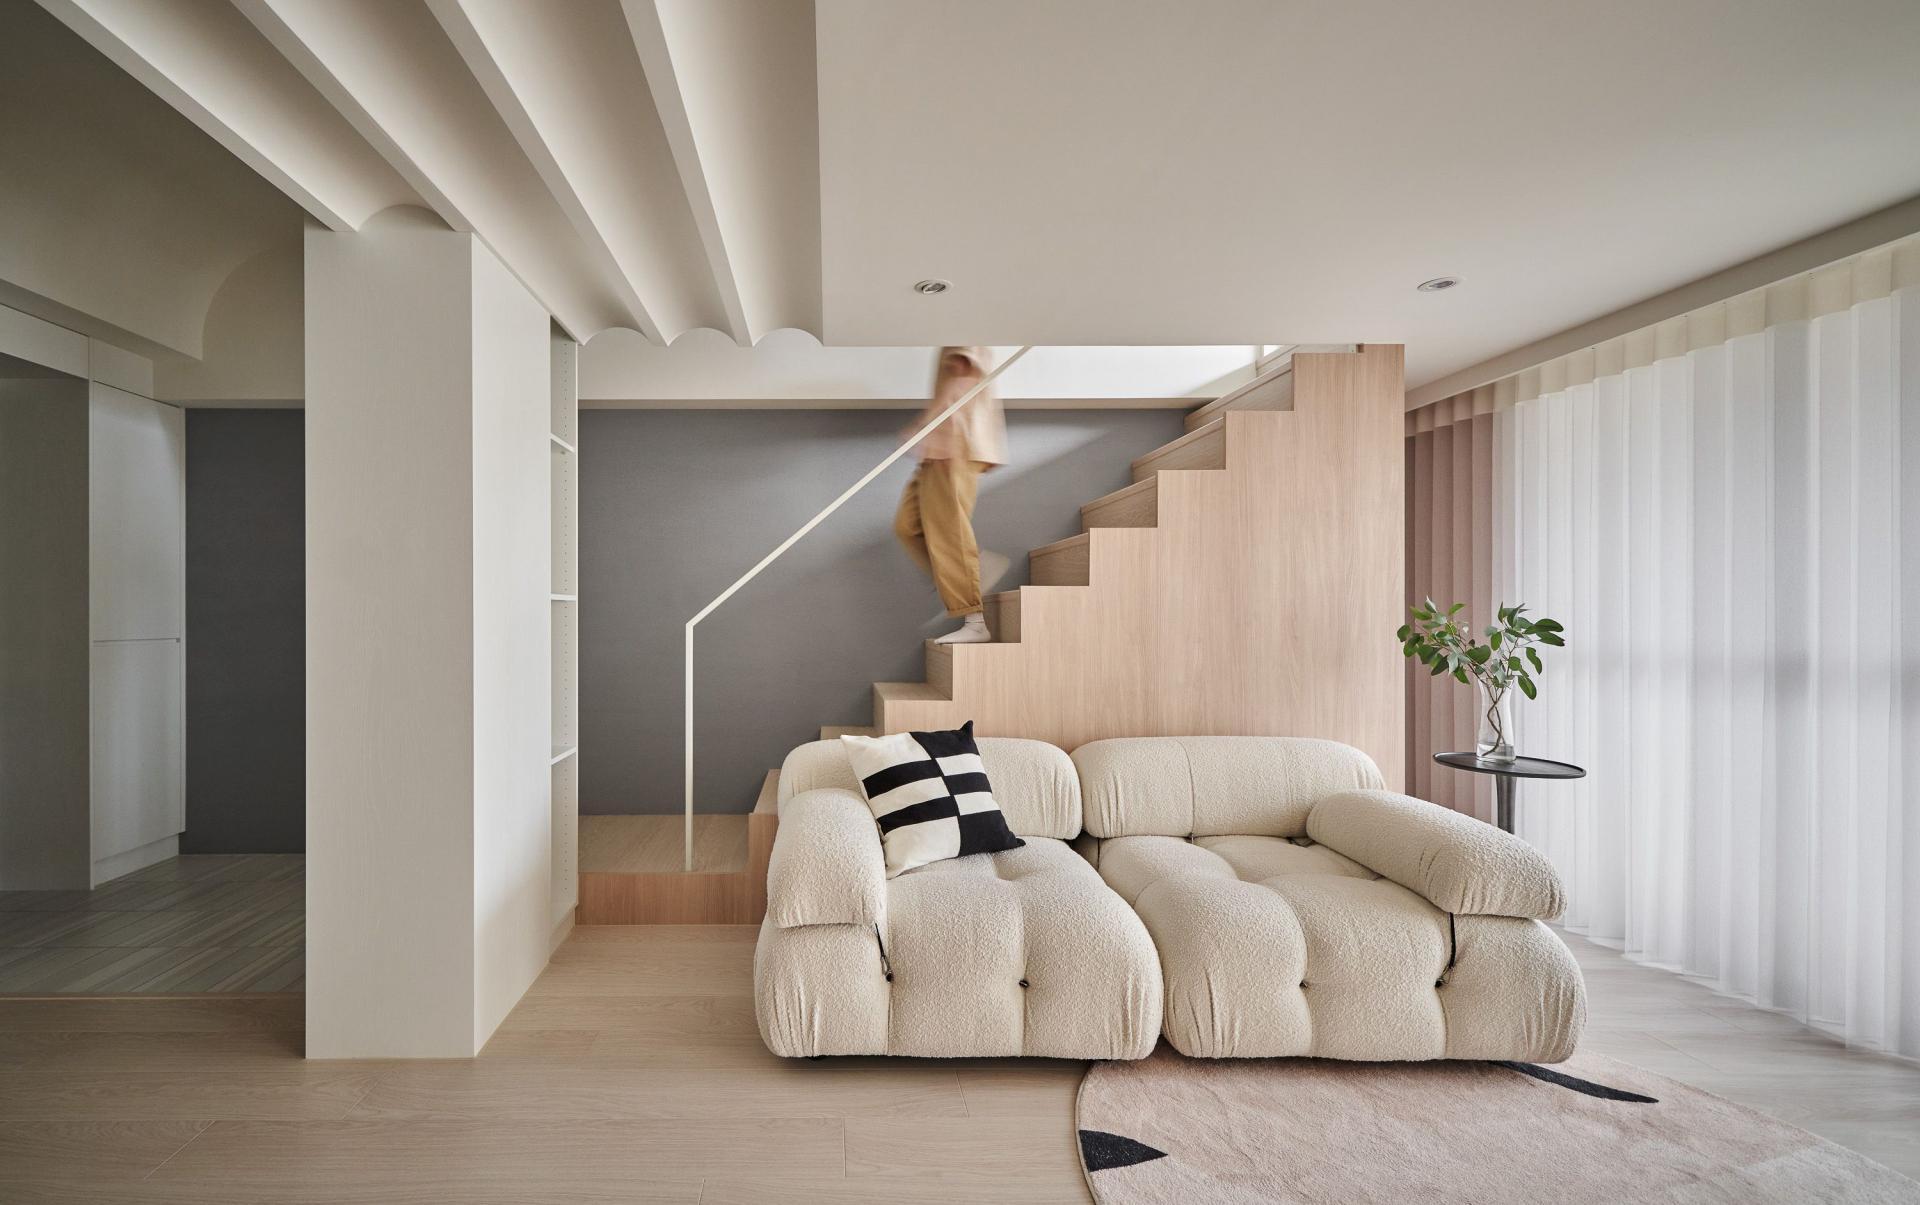 Inside a 419 sq. ft. home in Taipei that masters "old meet new"